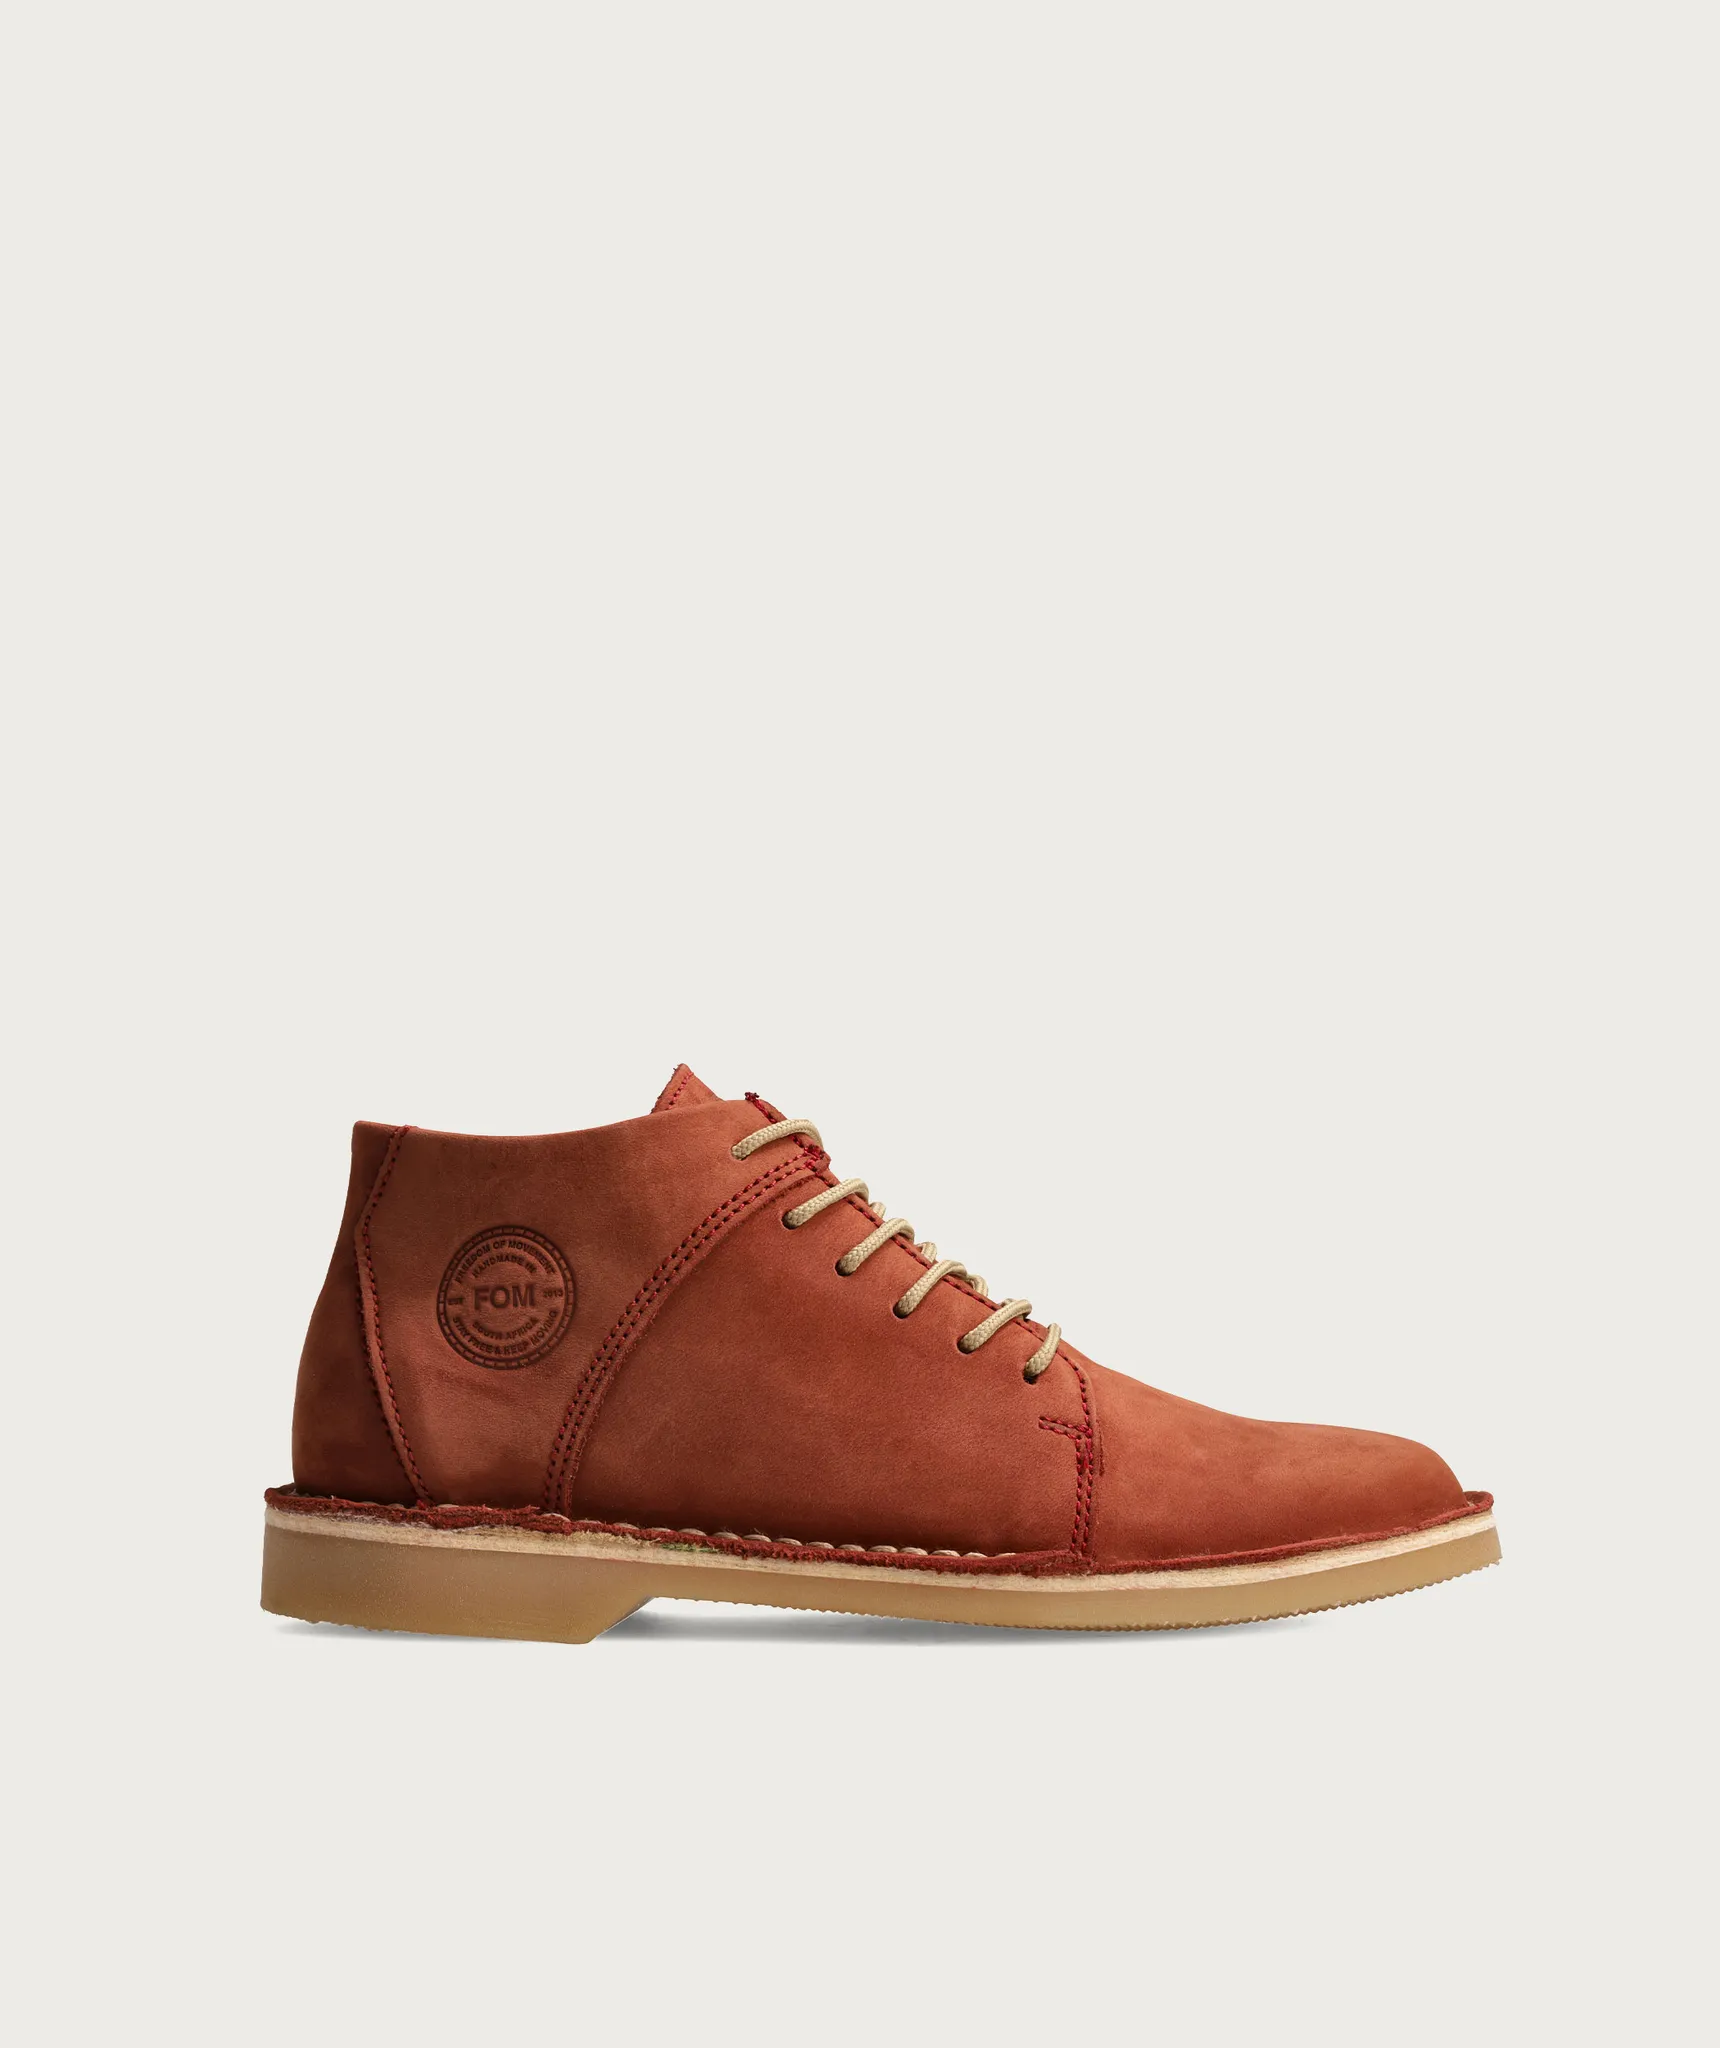 FOM Vellies Lite Rust (Limited Edition)